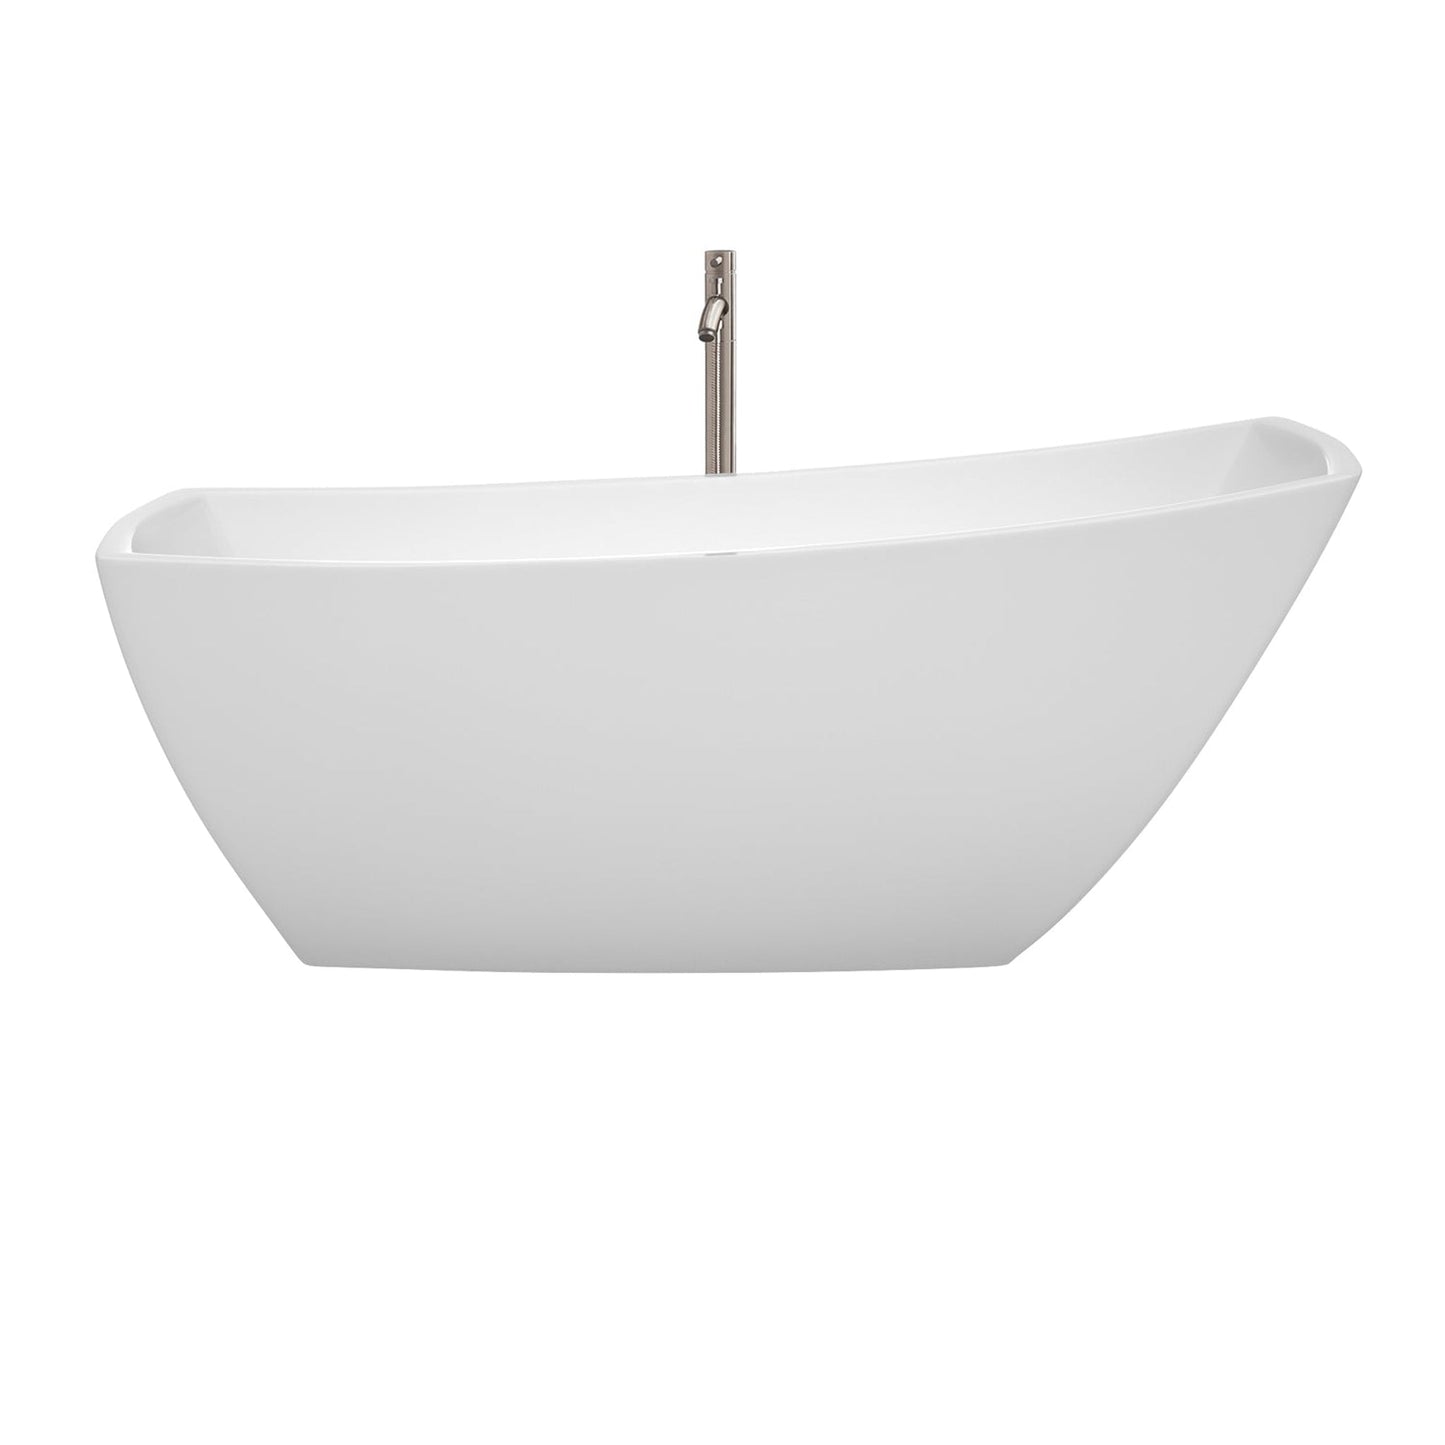 Wyndham Collection Antigua 67" Freestanding Bathtub in White With Floor Mounted Faucet, Drain and Overflow Trim in Brushed Nickel